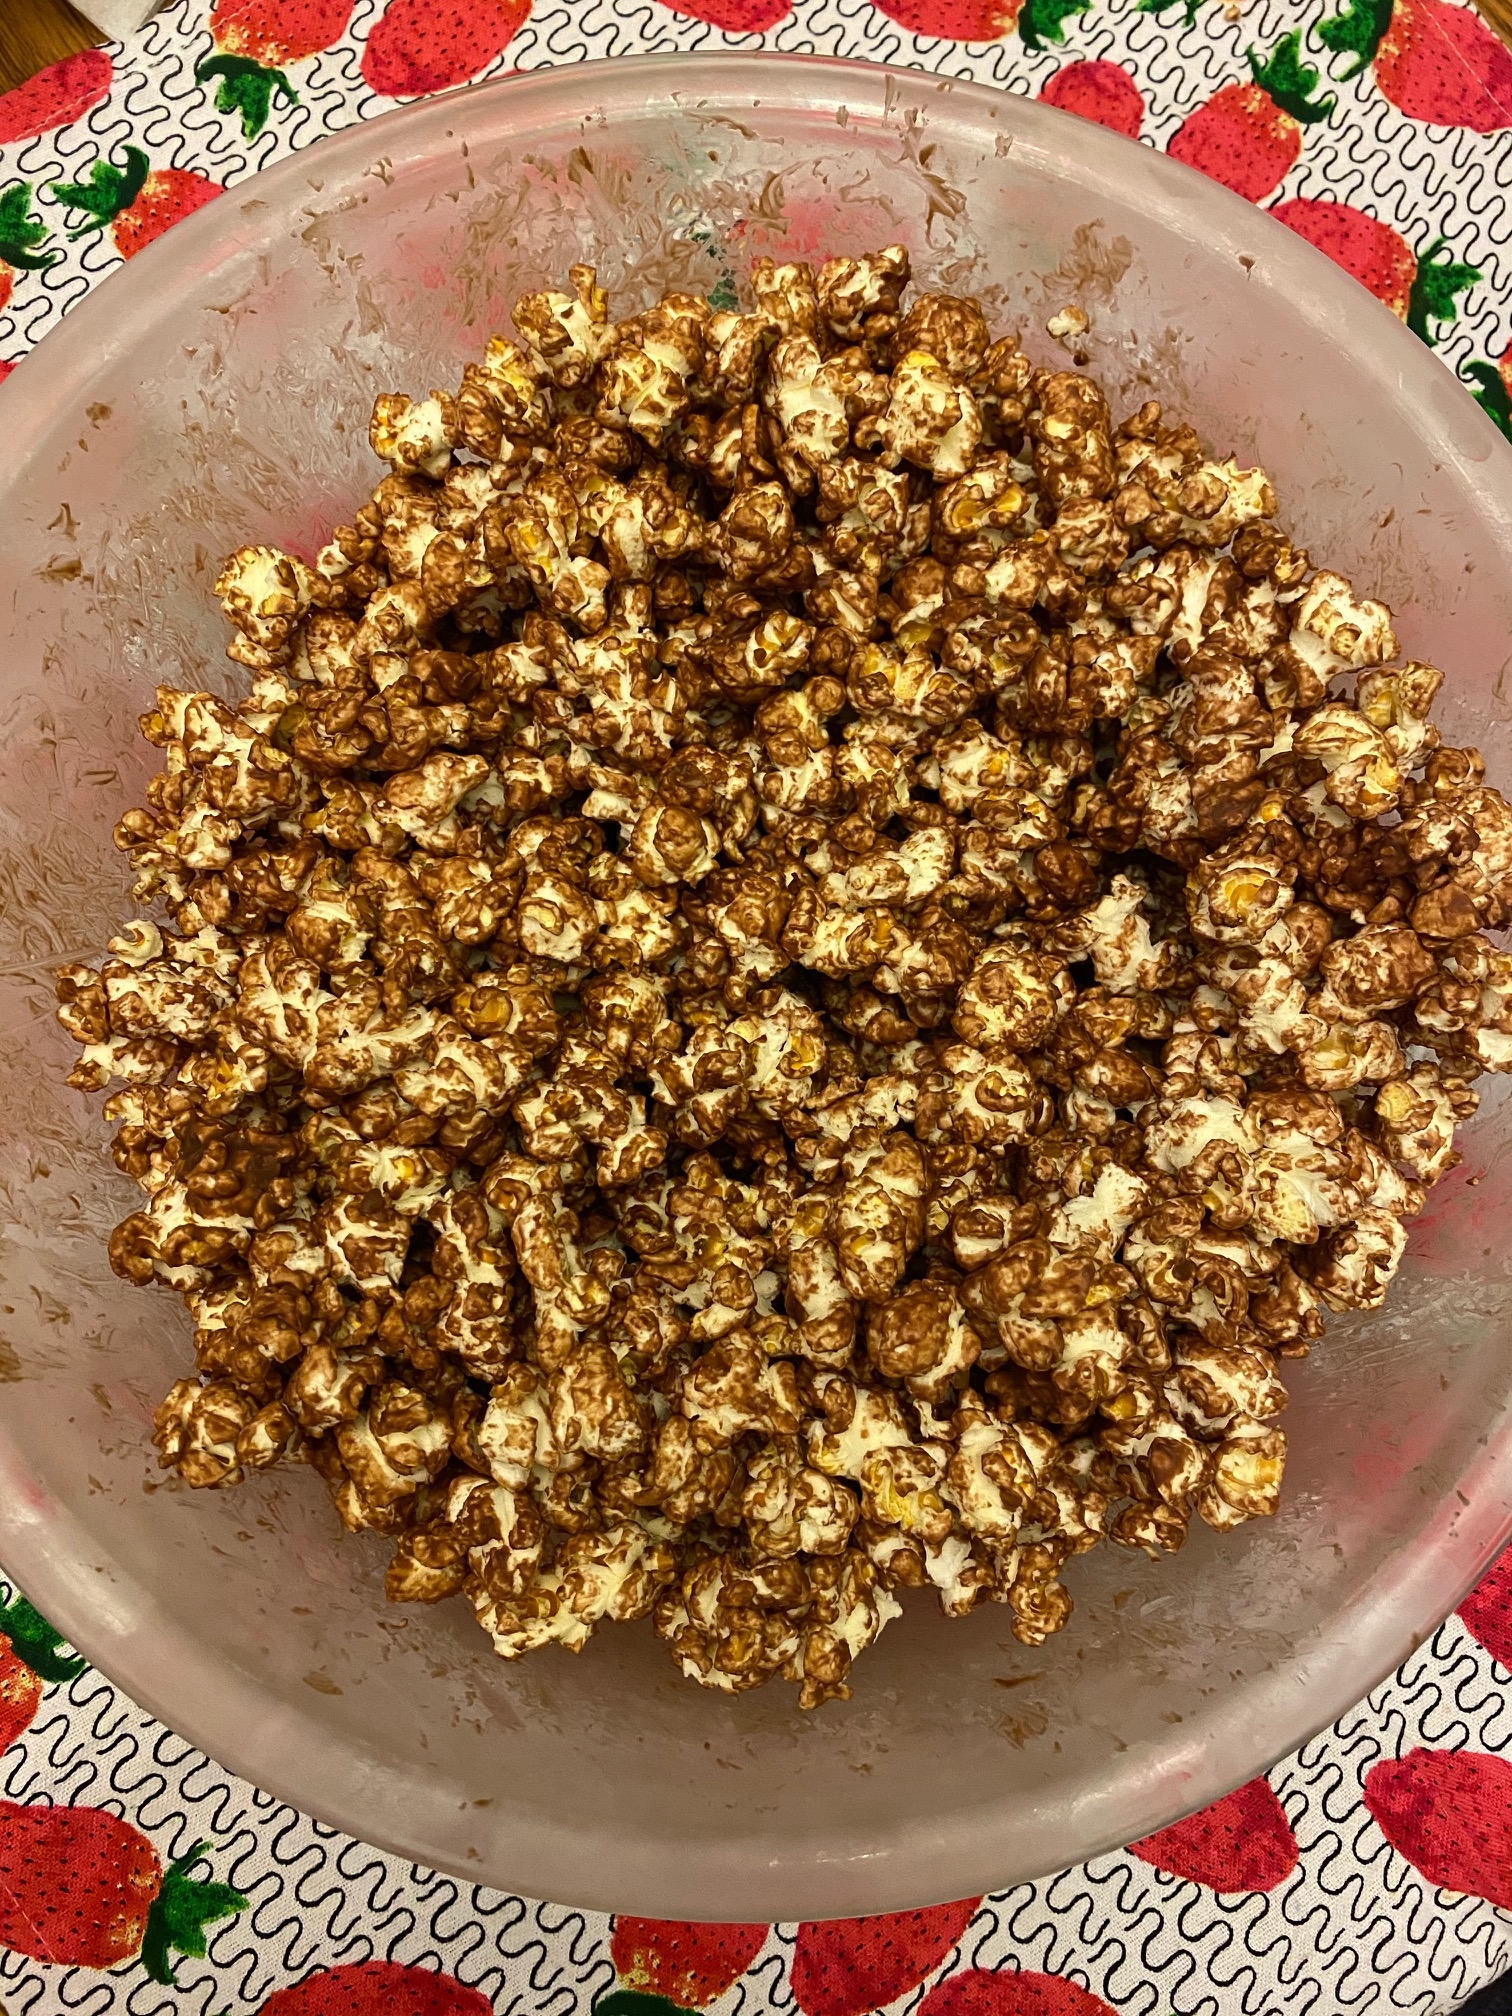 This homemade chocolate popcorn is amazing! This easy chocolate popcorn recipe is my go-to for a movie night! #popcorn